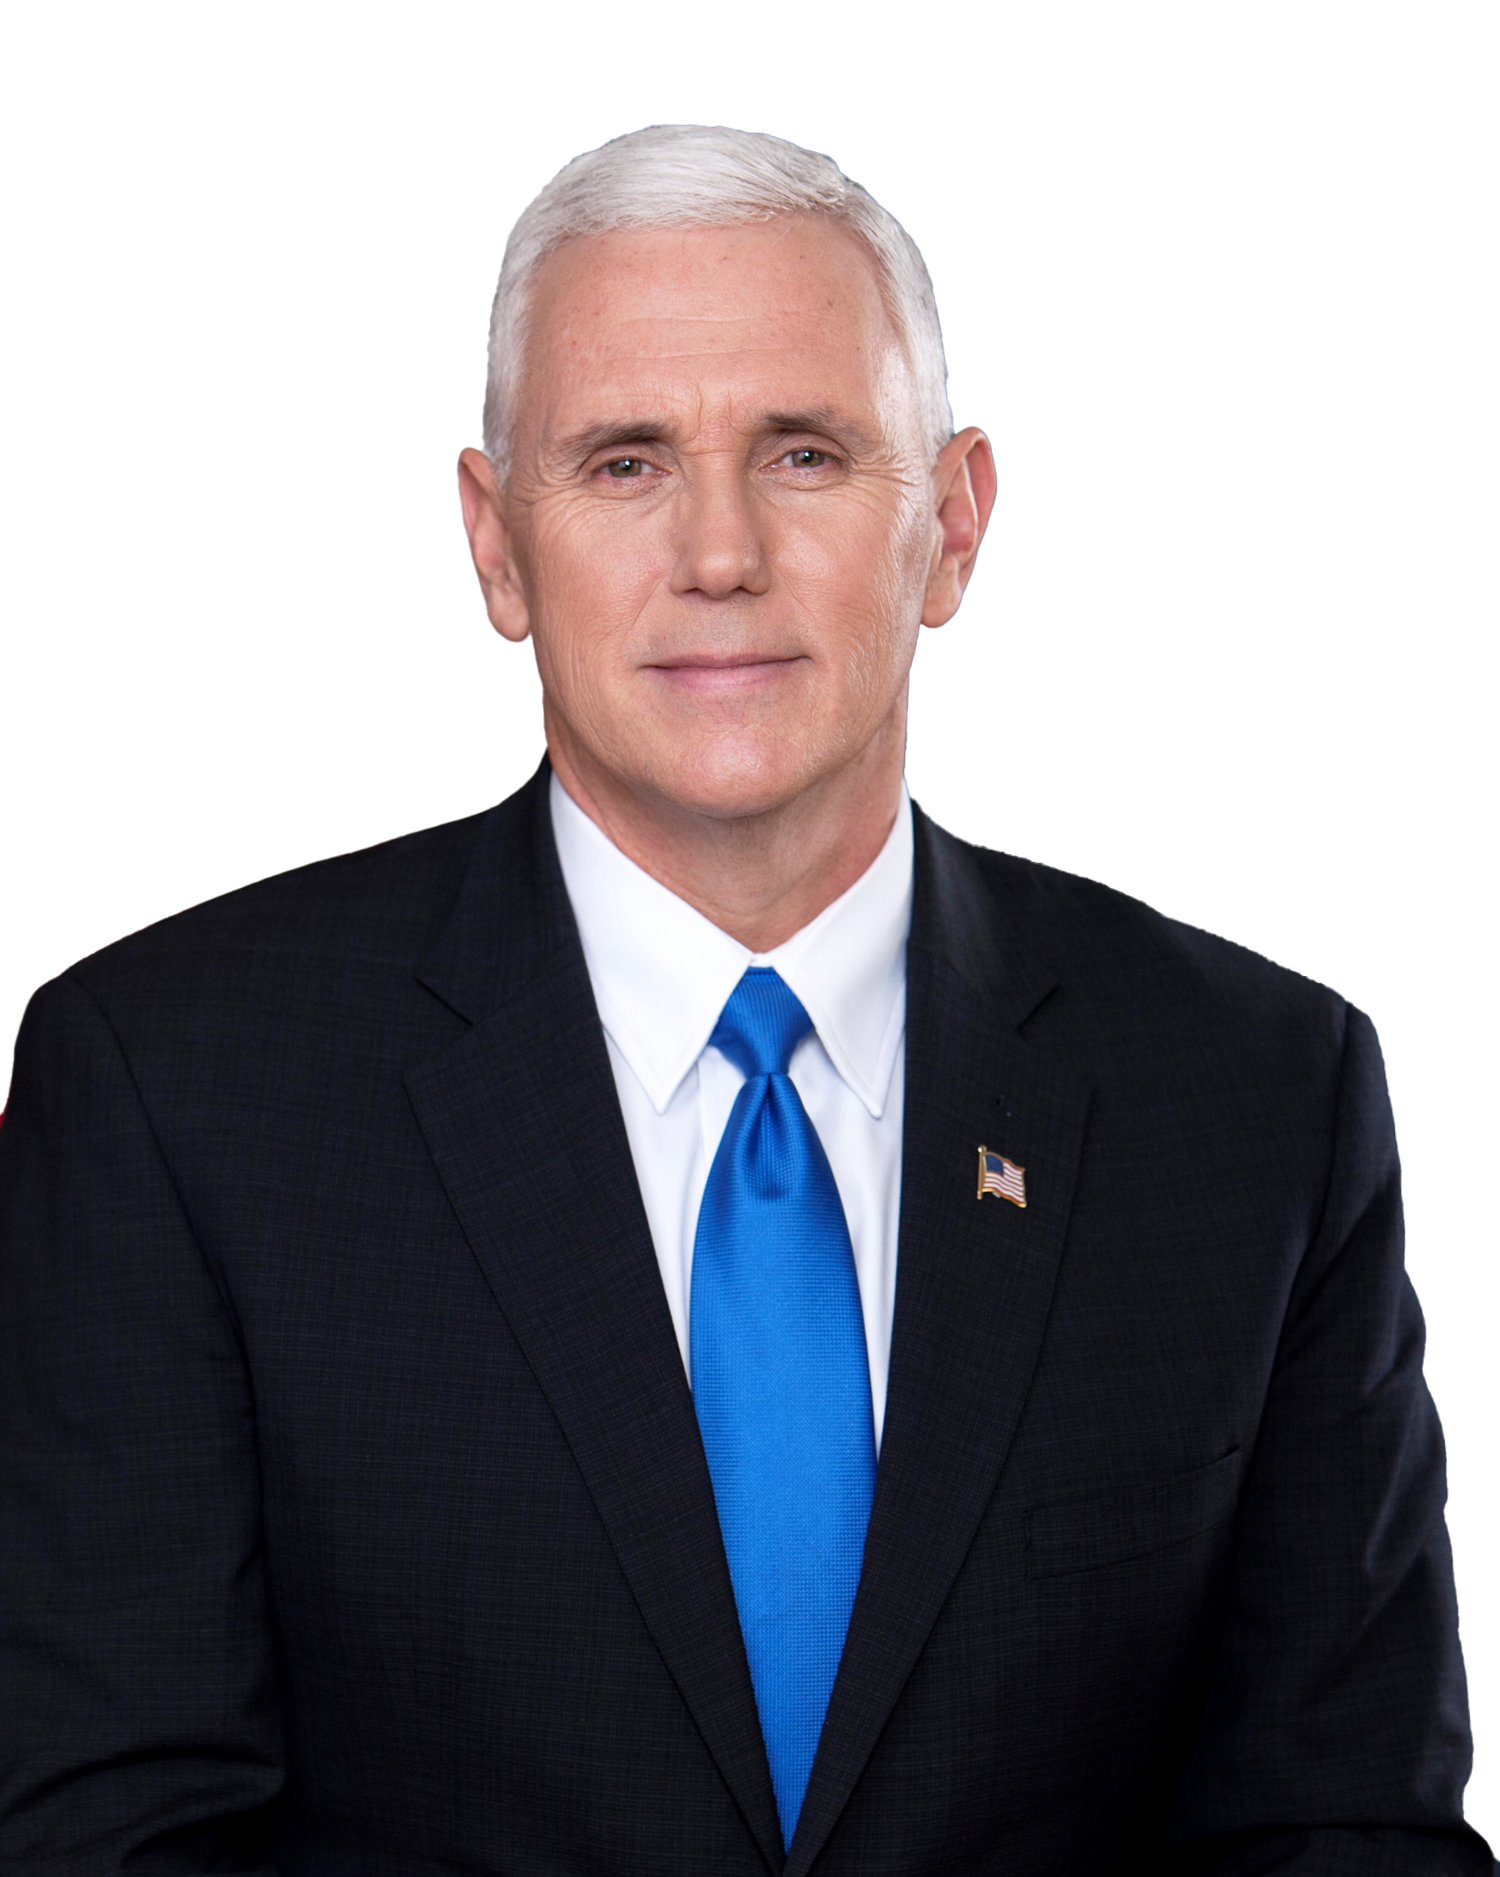 Mike Pence PNG High-Quality Image